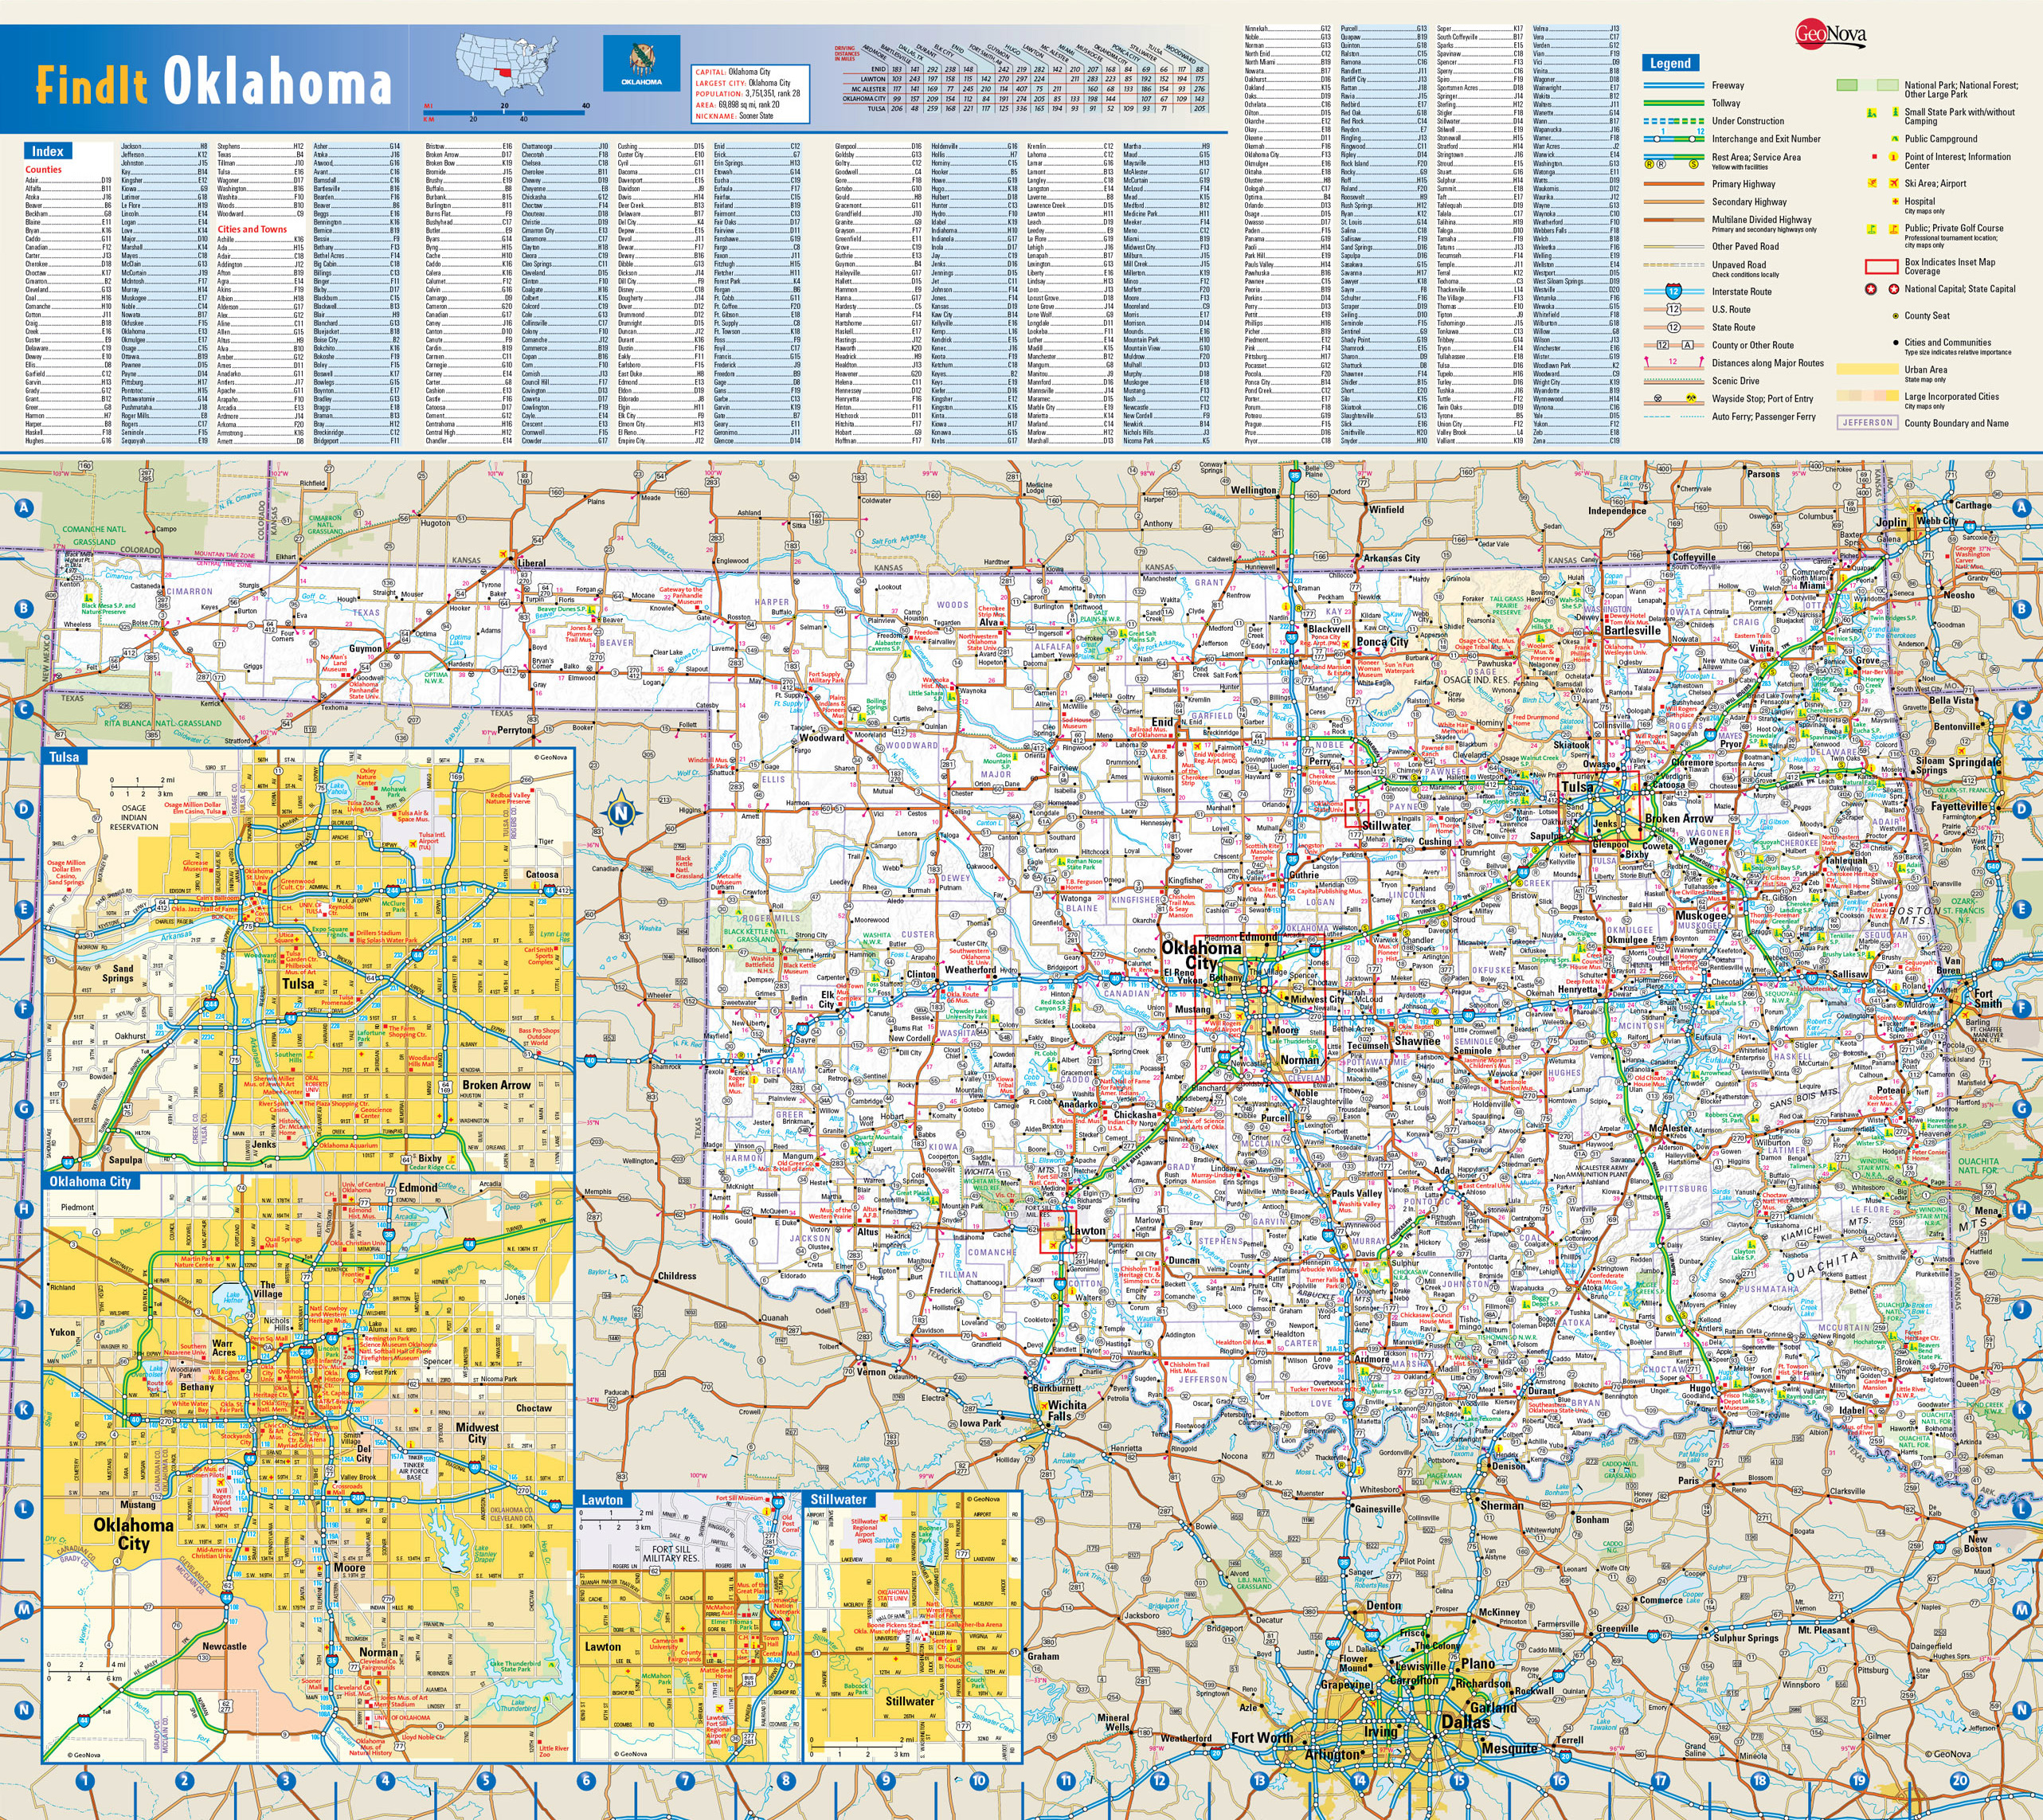 Oklahoma Map With All Cities Large detailed roads and highways map of Oklahoma state with 